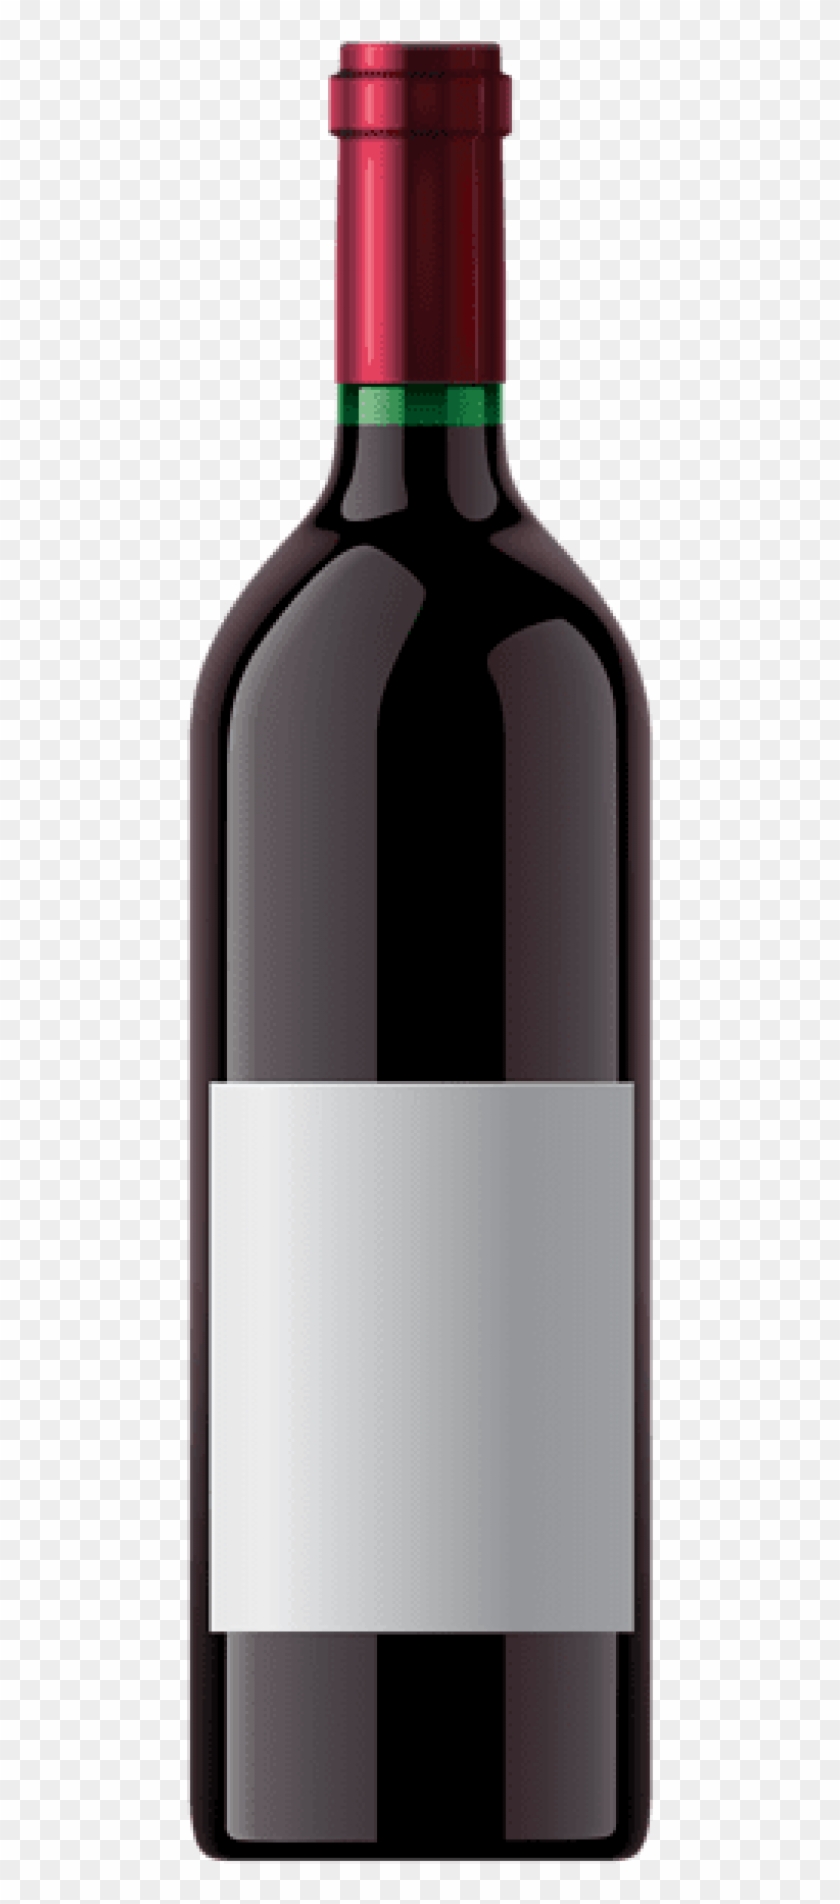 Free Png Download Red Wine Bottle Png Images Background - Transparent Background Red Wine Bottles Png Clipart